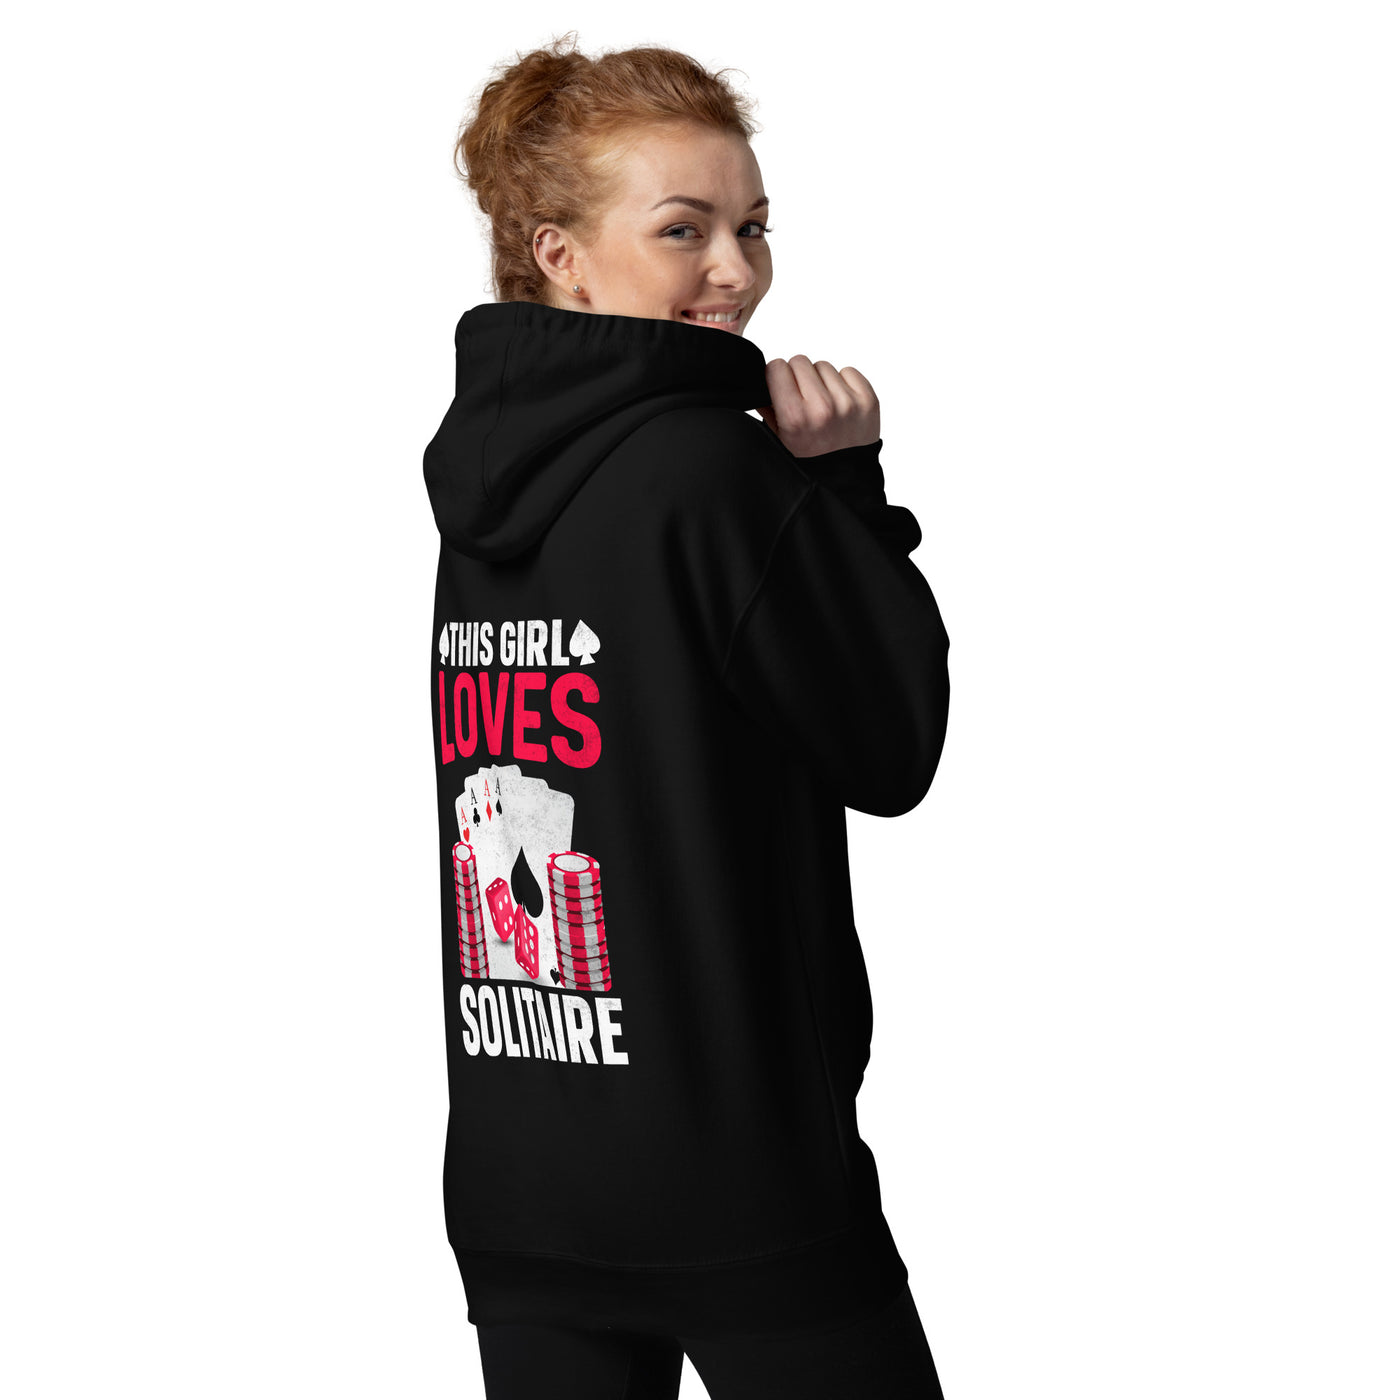 This Girl Loves  Solitaire - Unisex Hoodie ( Back Print )